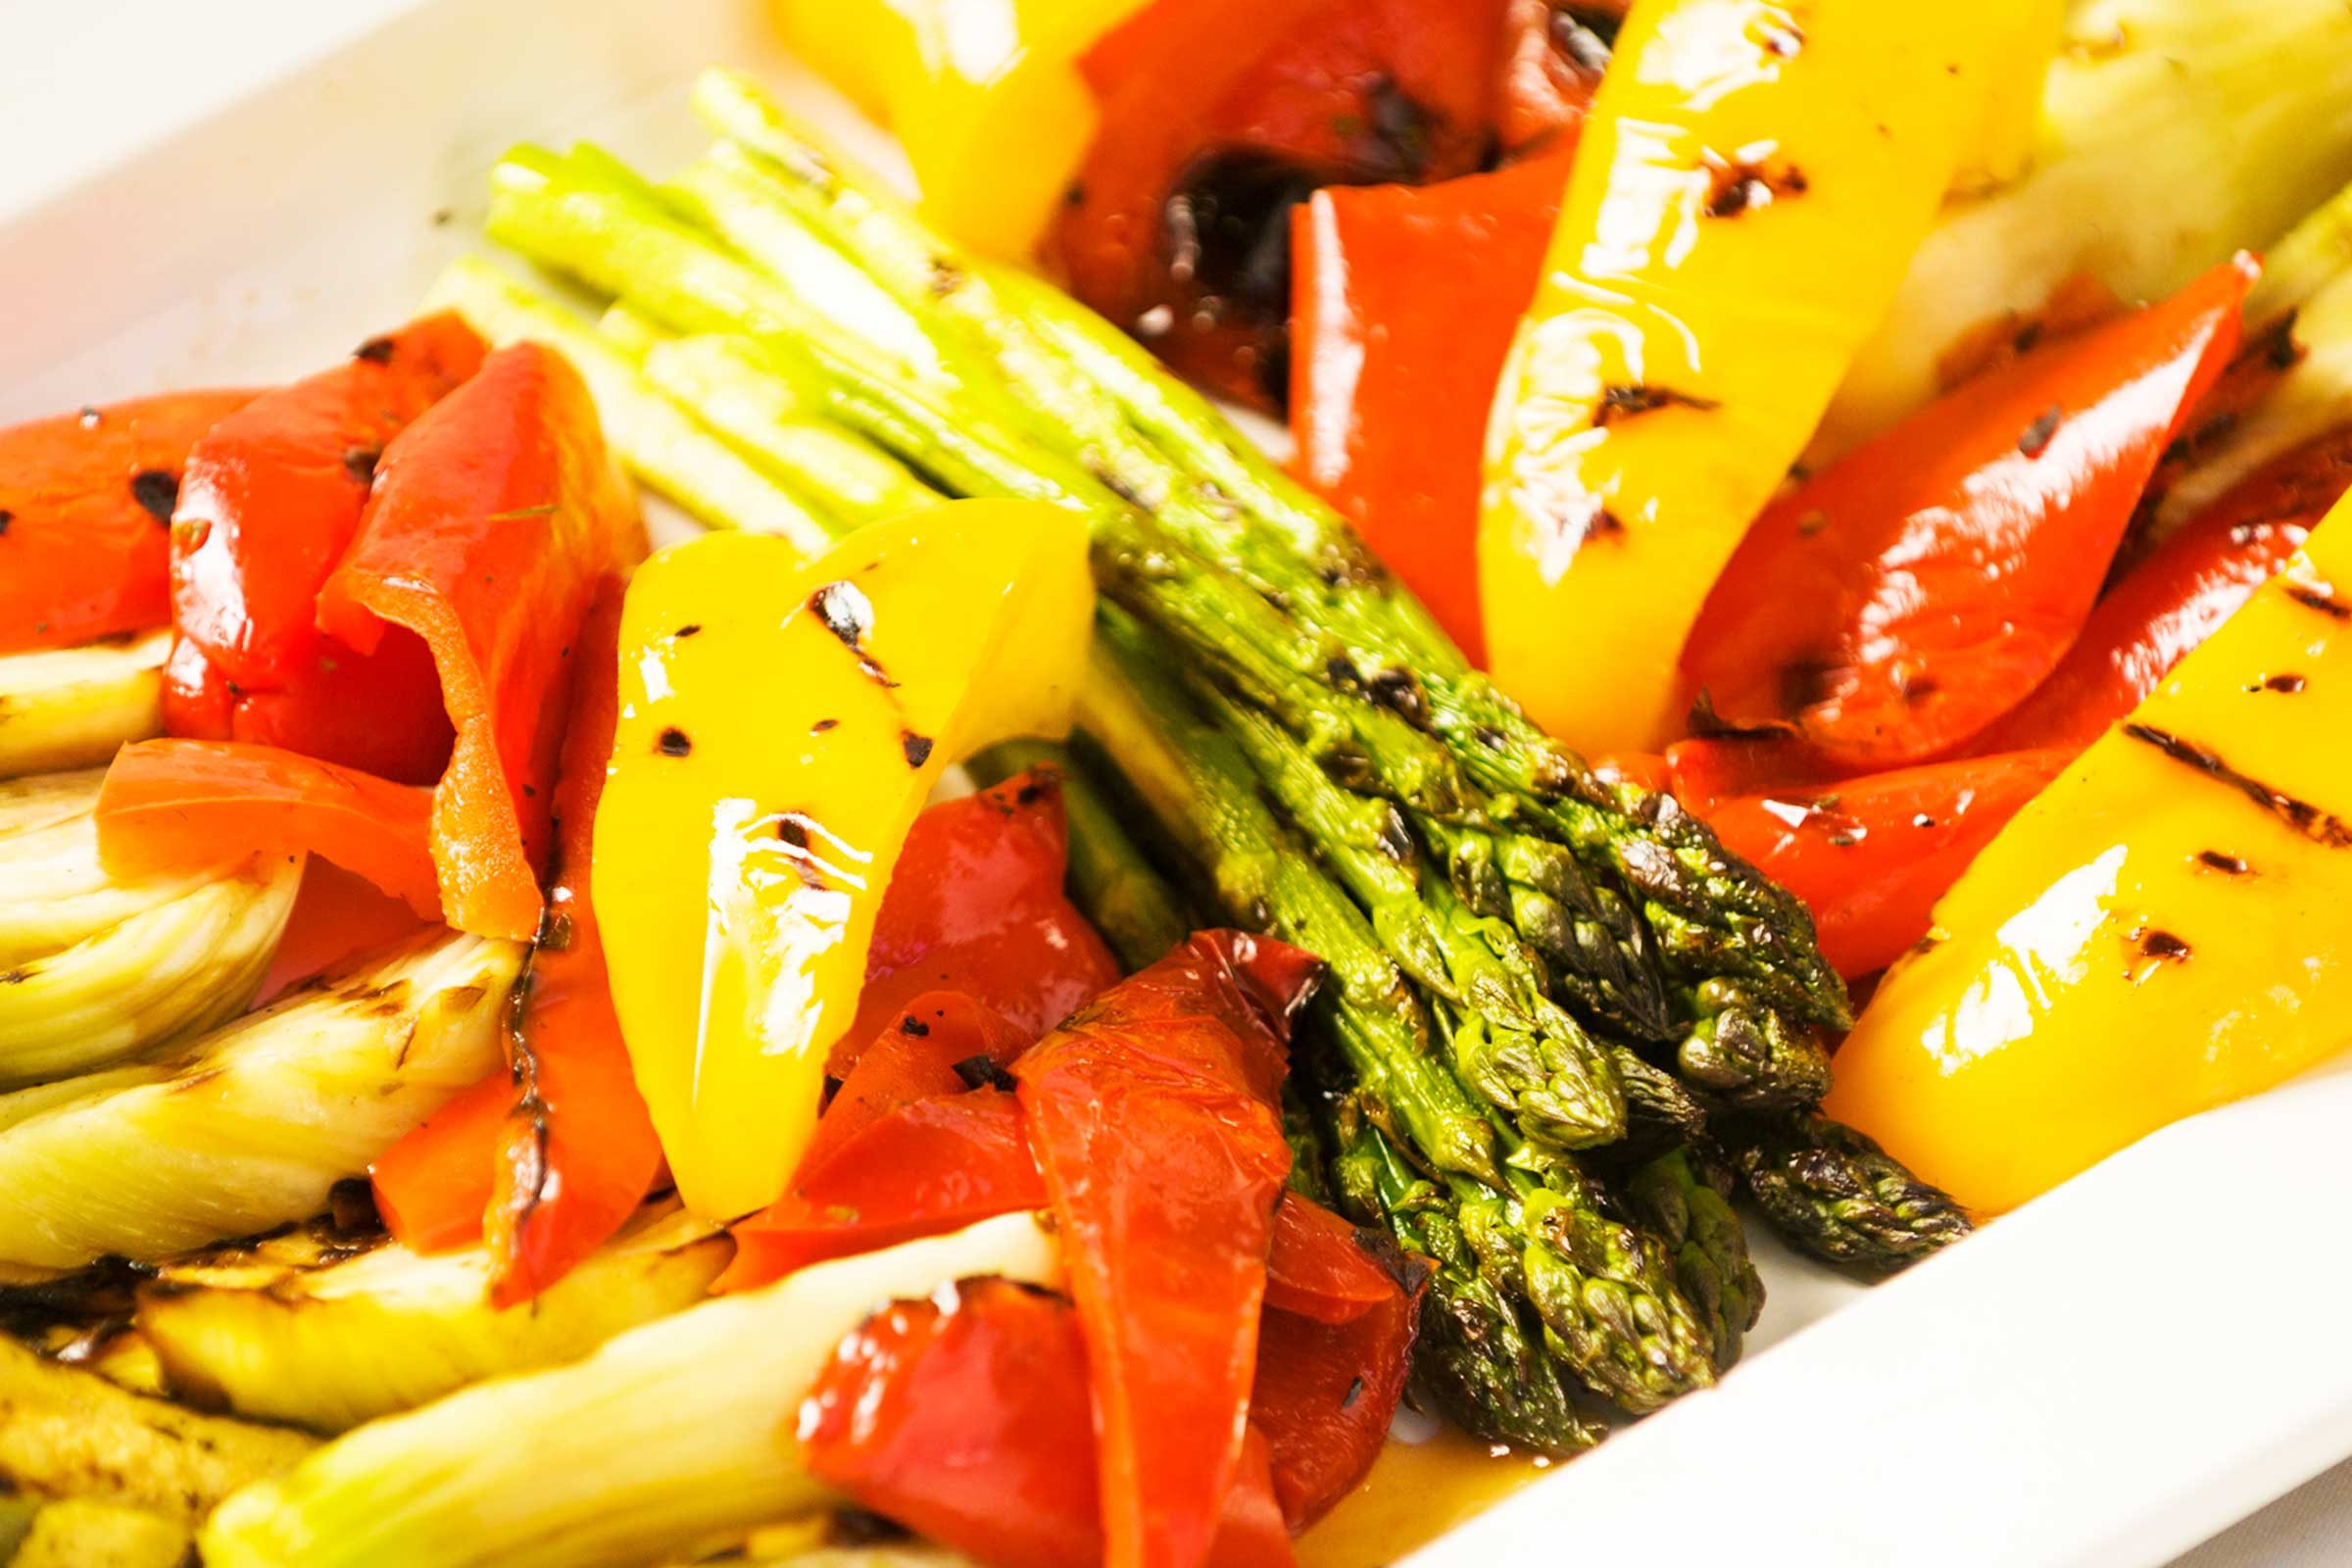 plate of cooked bell peppers, asparagus, and other vegetables